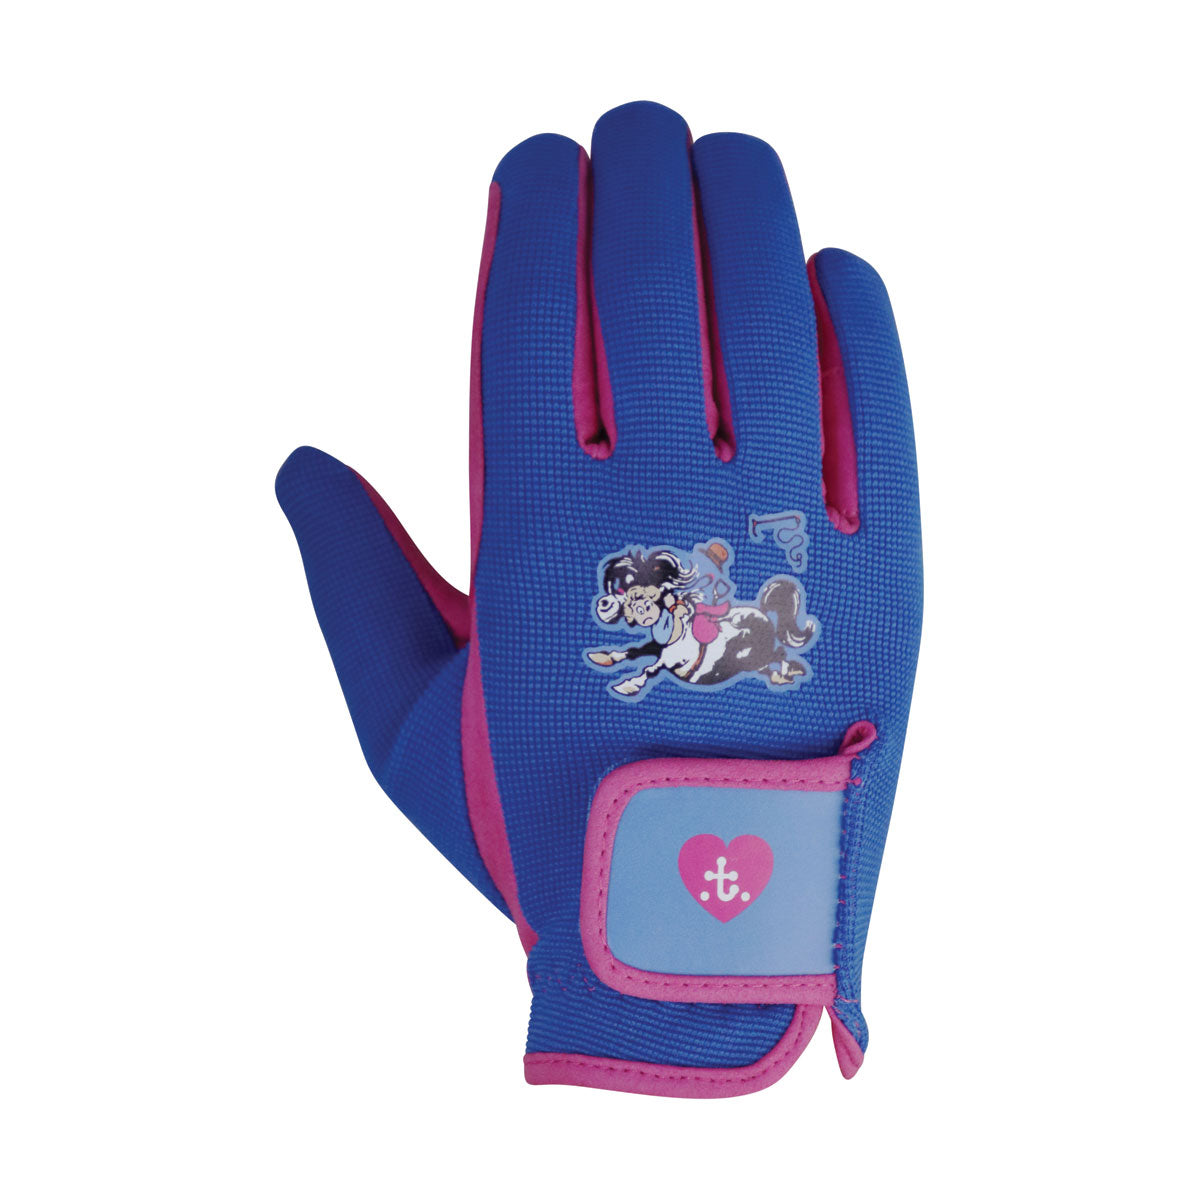 Hy Equestrian Thelwell Collection Race Riding Gloves - Just Horse Riders